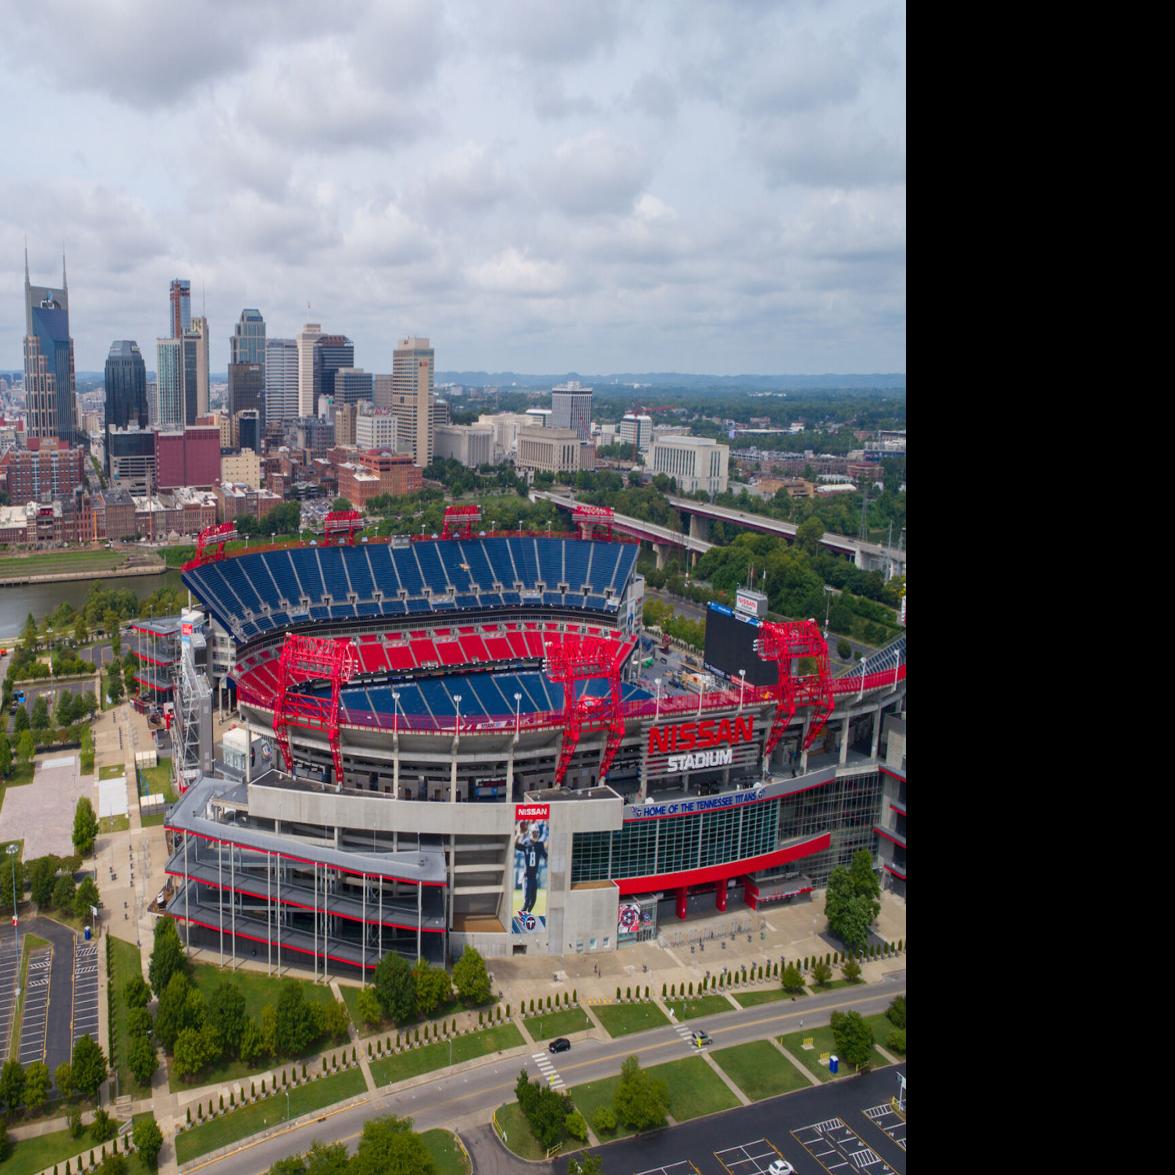 What's next for Nissan Stadium?